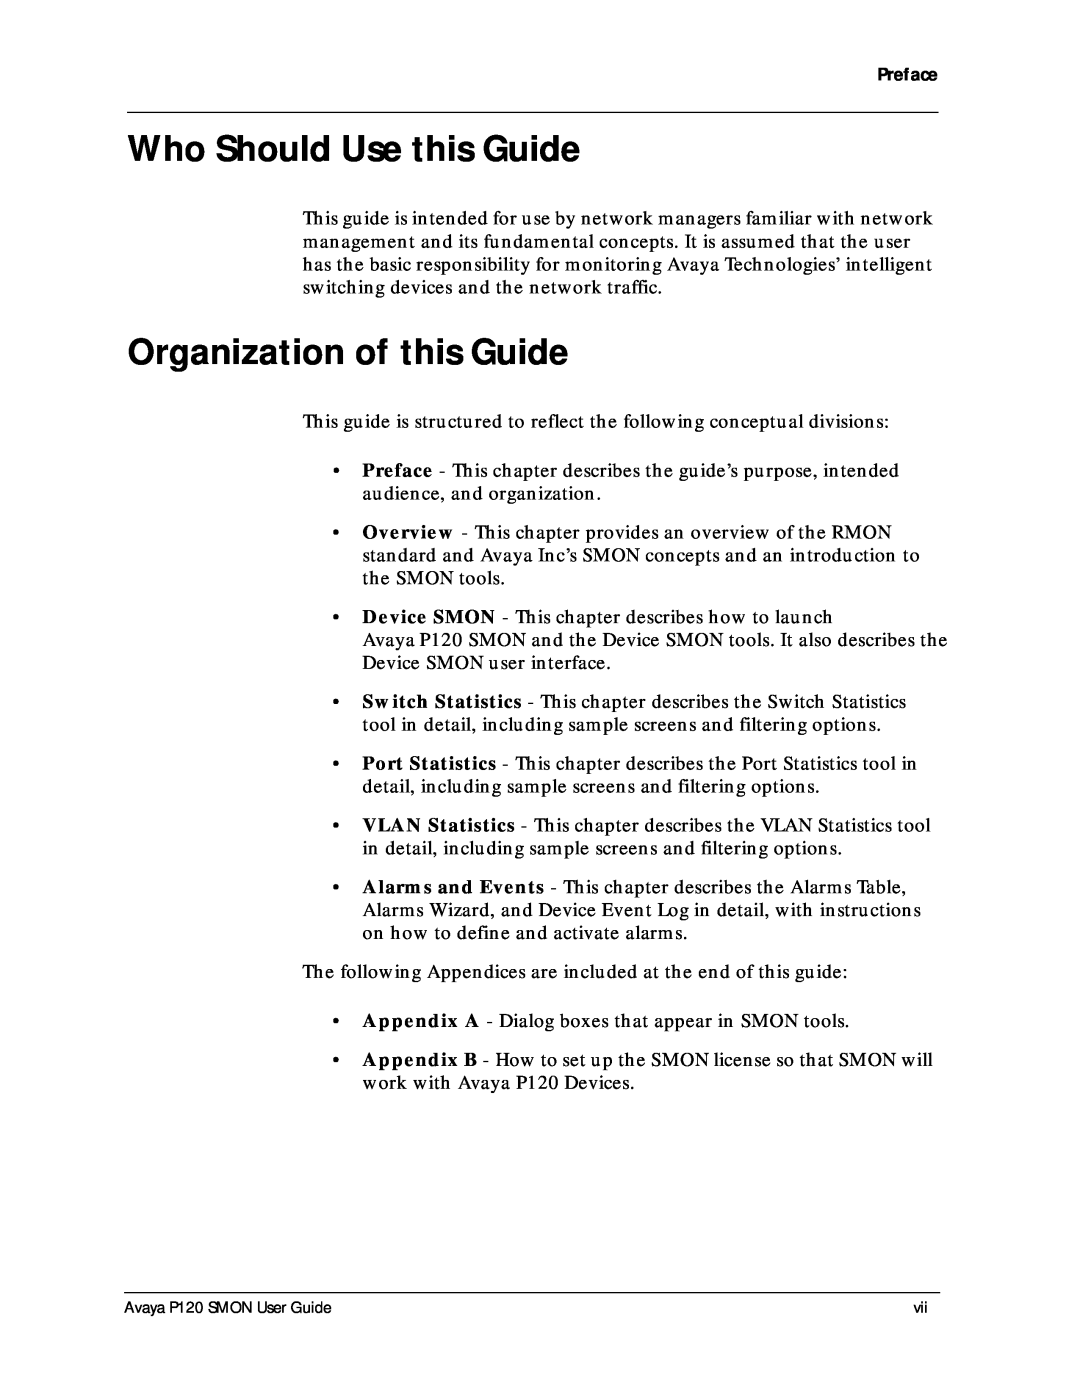 Avaya P120 SMON manual Who Should Use this Guide, Organization of this Guide 